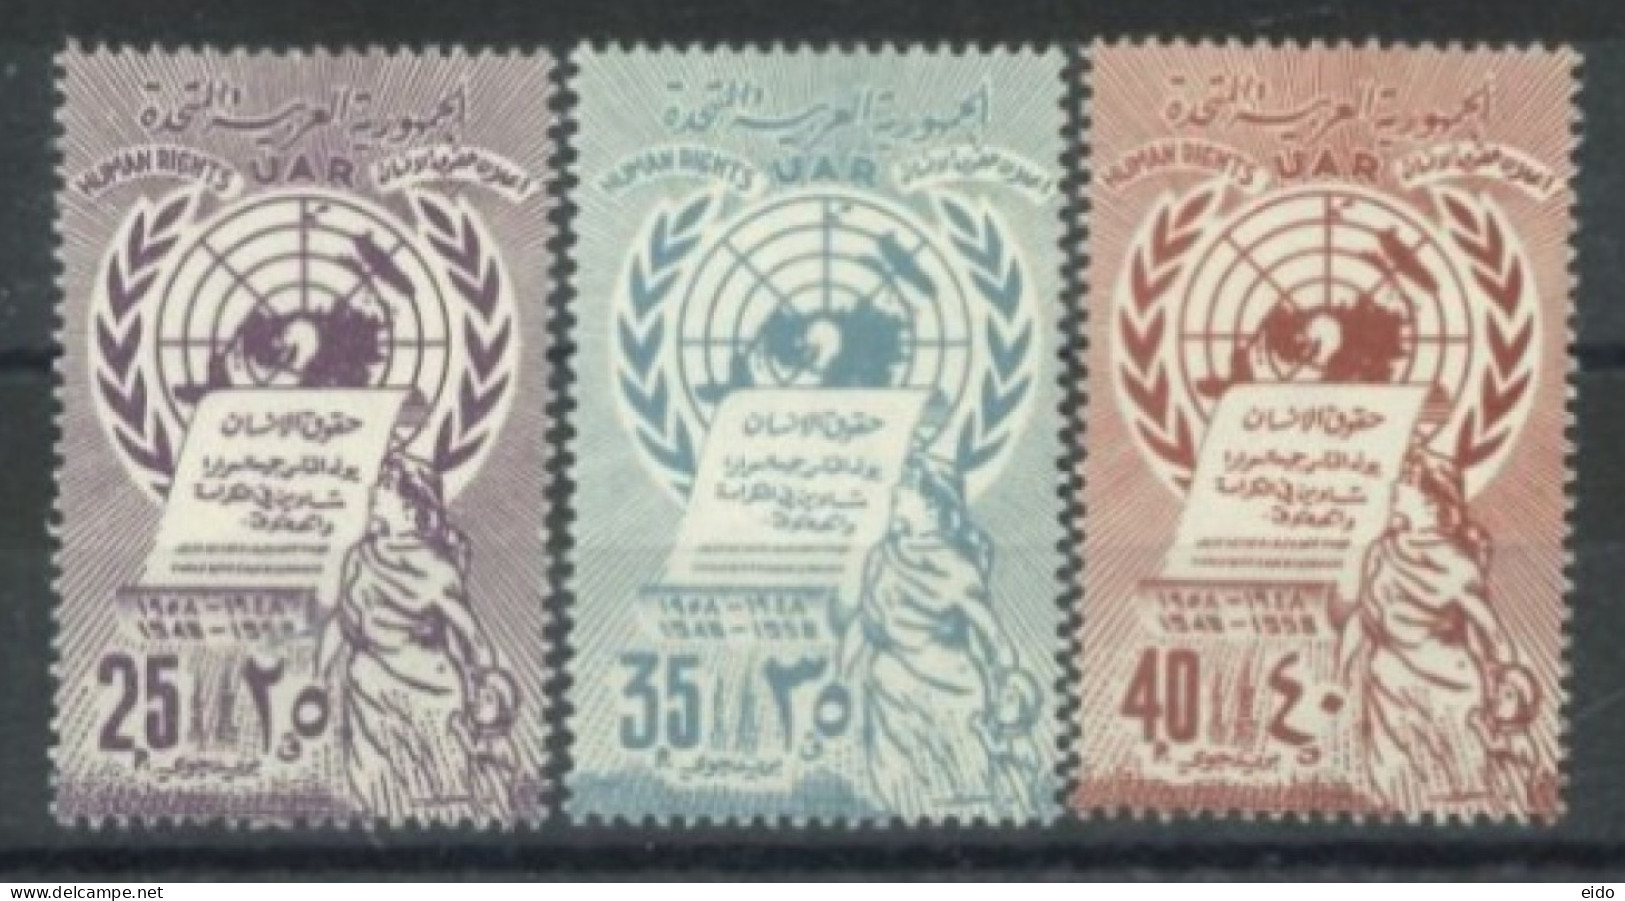 SYRIA - 1958, 10th ANNIVERSARY OF DECLARATION OF HUMAN RIGHTS STAMPS COMPLETE SET OF 3, SG # 678/80, UMM (**). - Syrie